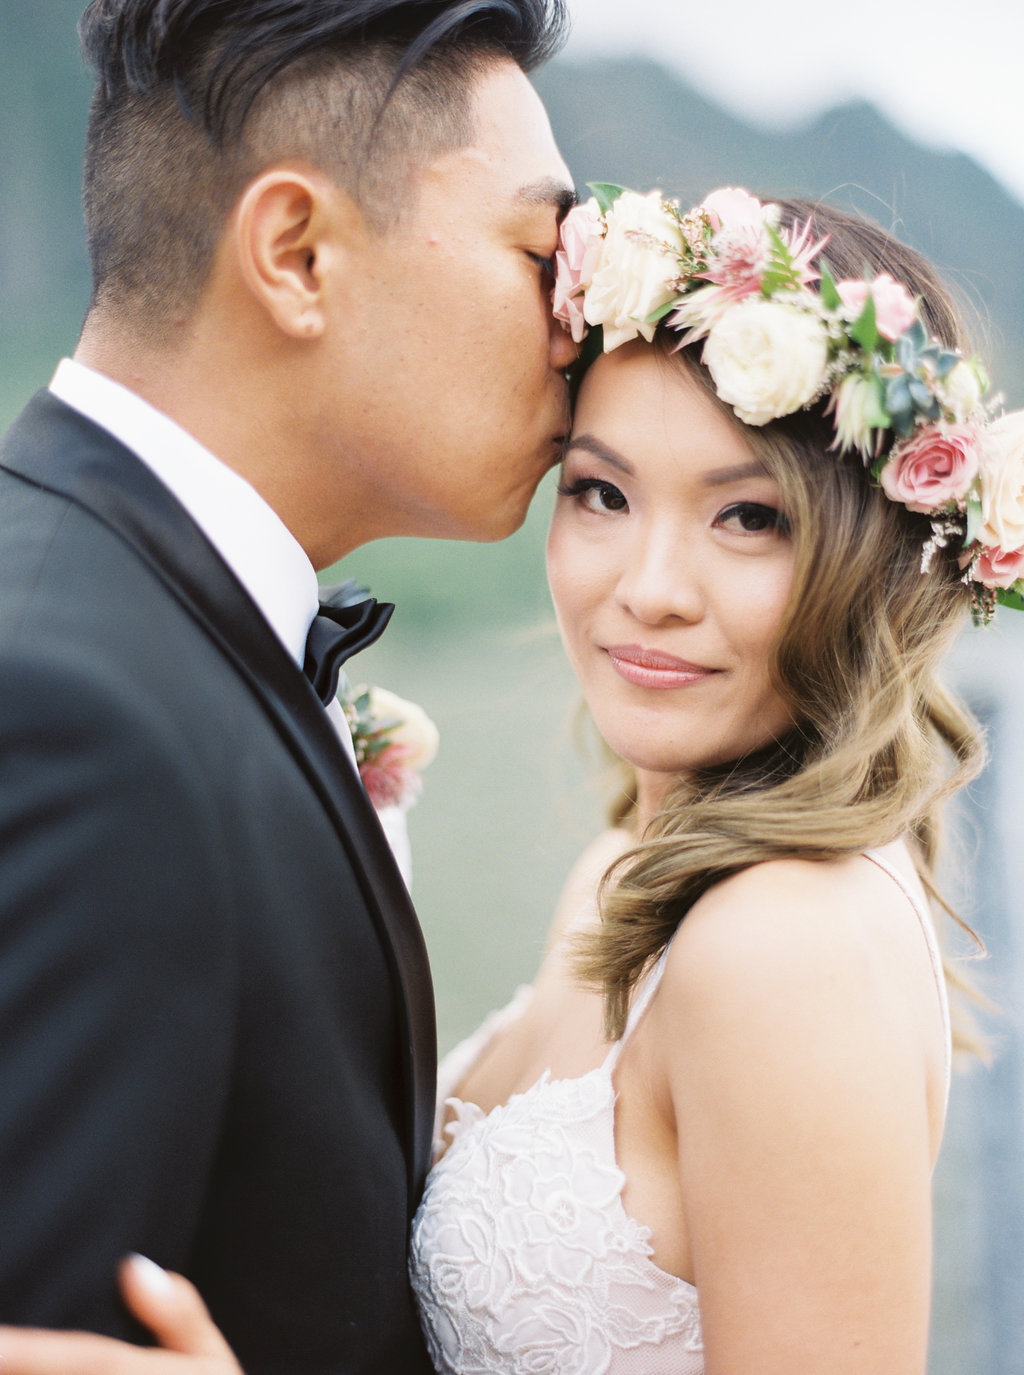 bride and groom portrait. groom kisses bride on the forehead. bride wears hair down topped with a floral crown